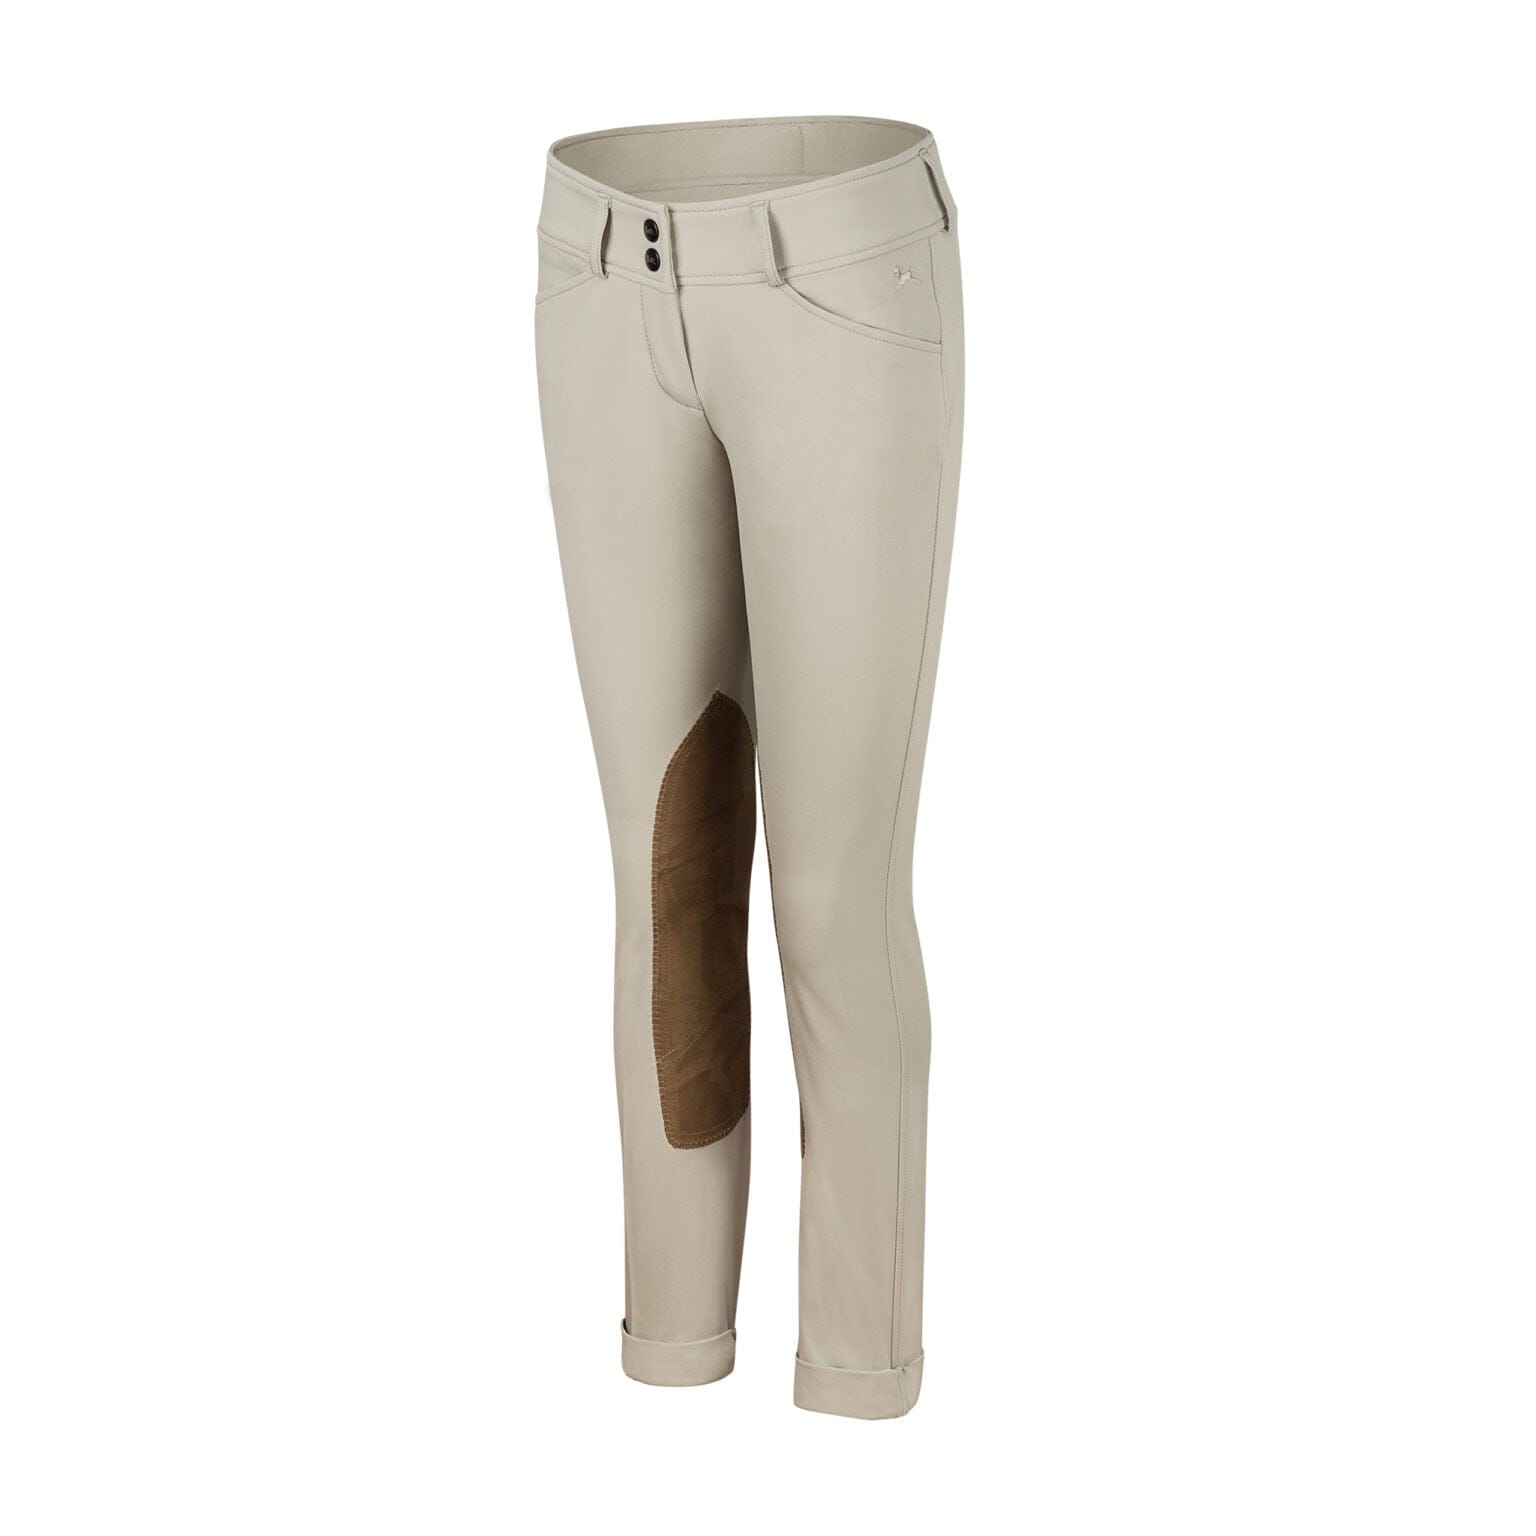 Women Riding Silicon Knee Patch Breeches for Horse Riding Available at  Export Price Breeches